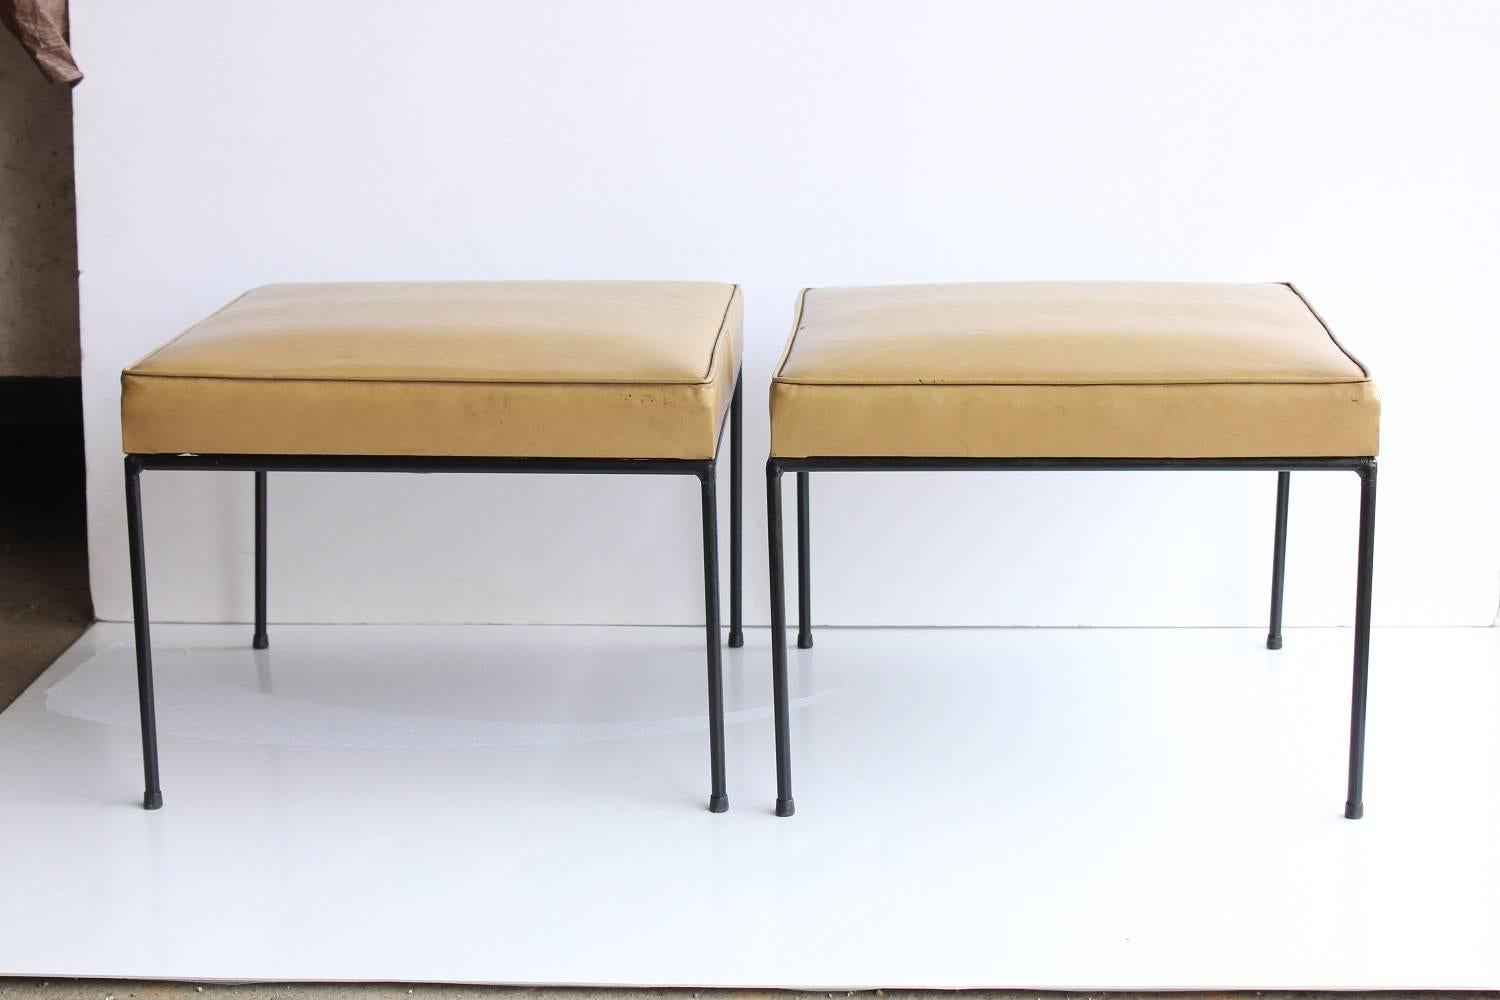 1950s leather and iron benches by Paul McCobb.